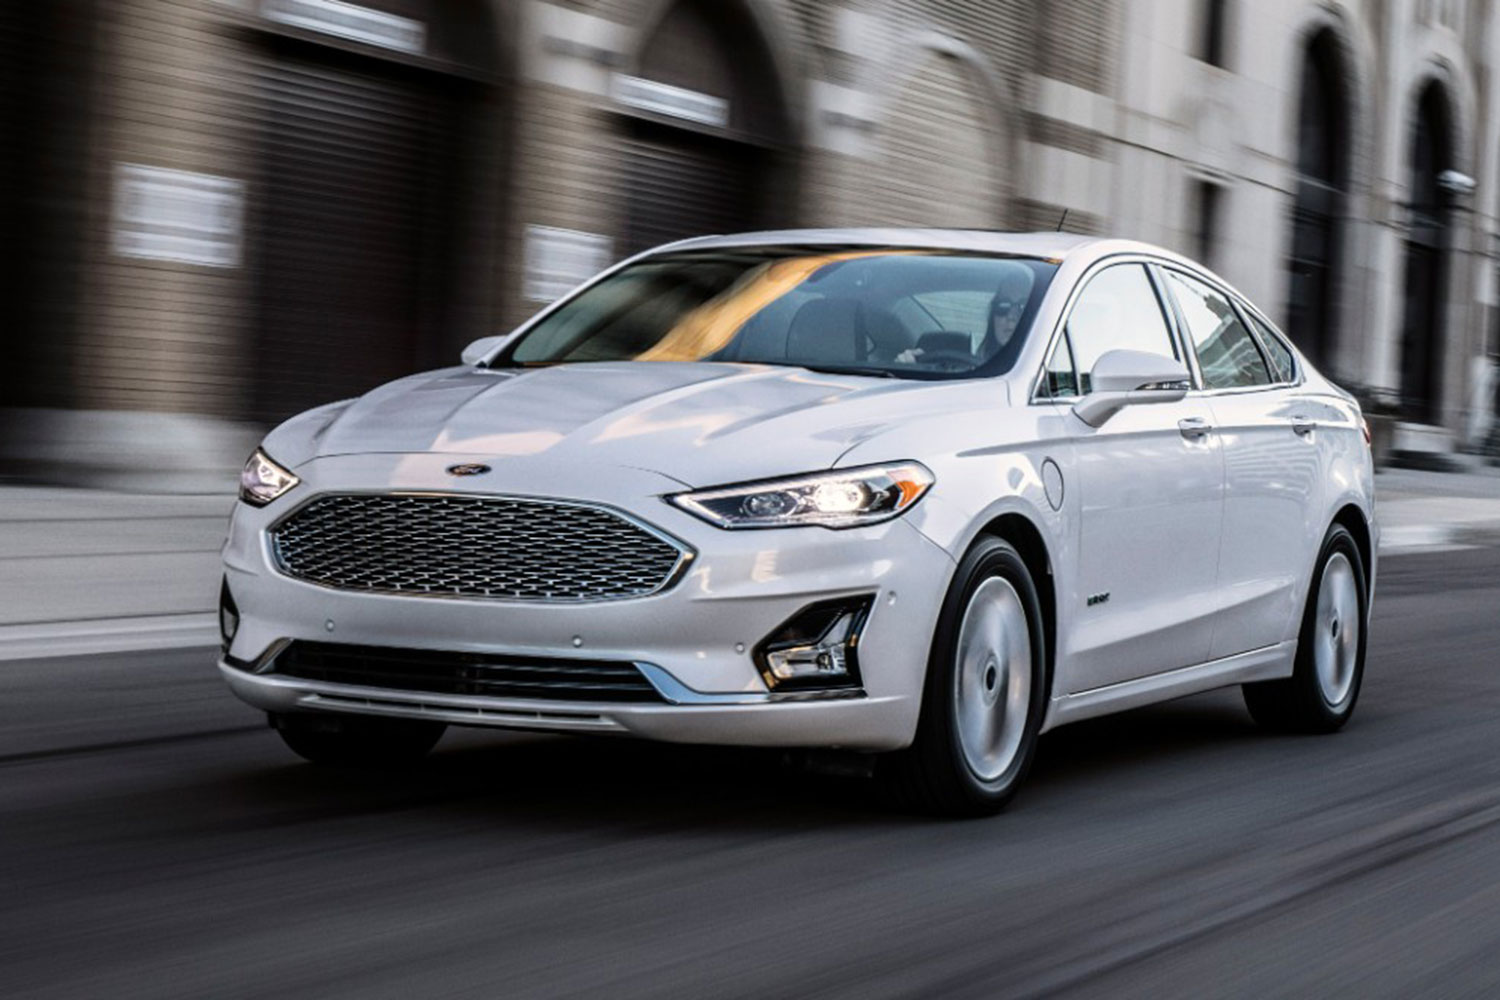 The 2019 Ford Fusion: The Midsize Sedan For Those Who Want More